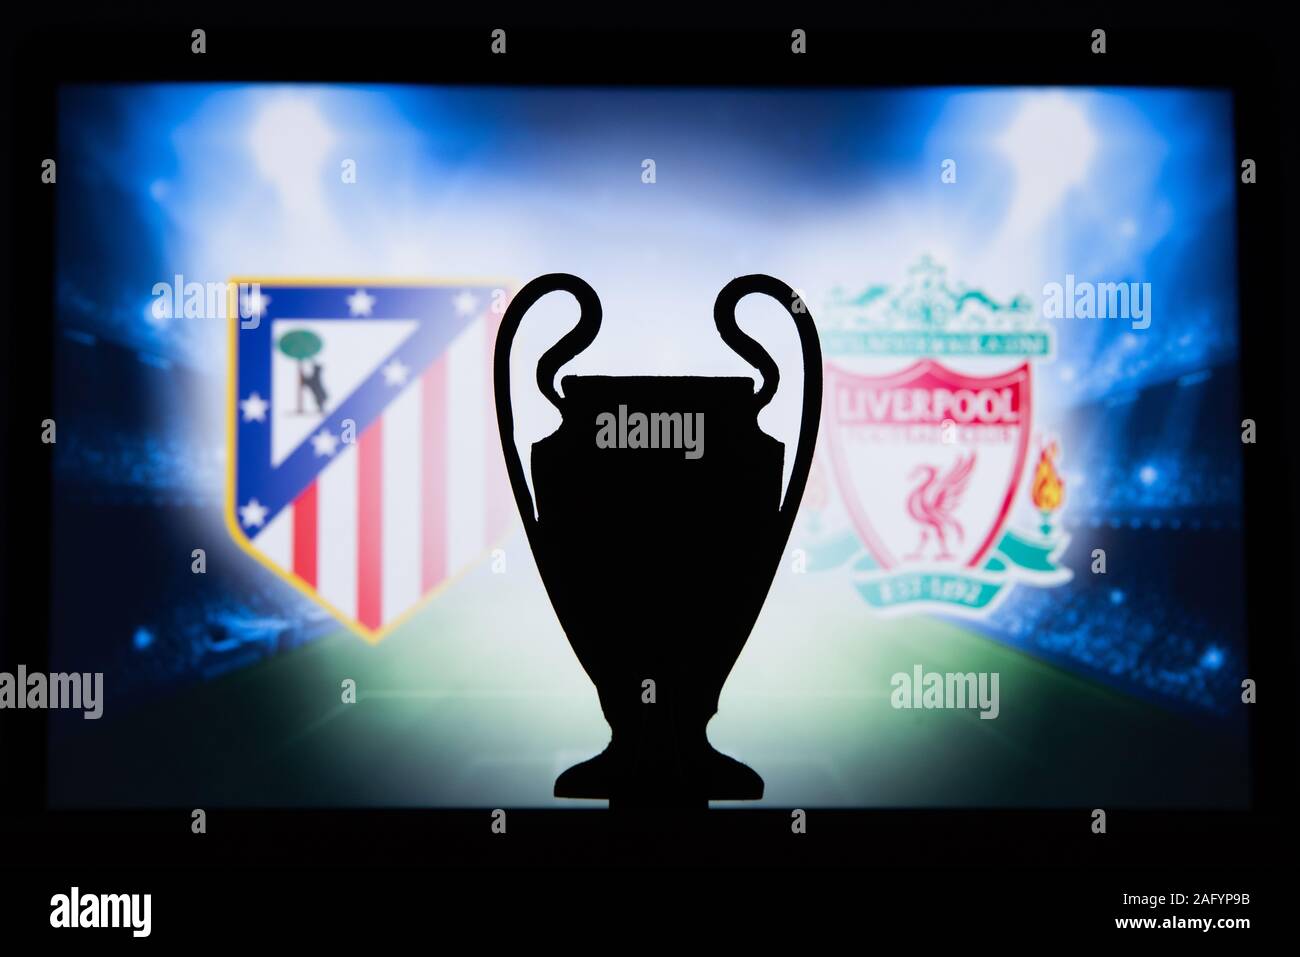 UEFA Champions League 2020, rund 16 UCL Fußball, Knockout Phase, Endspiel, offizielle adidas Fußball 2020 Stockfoto